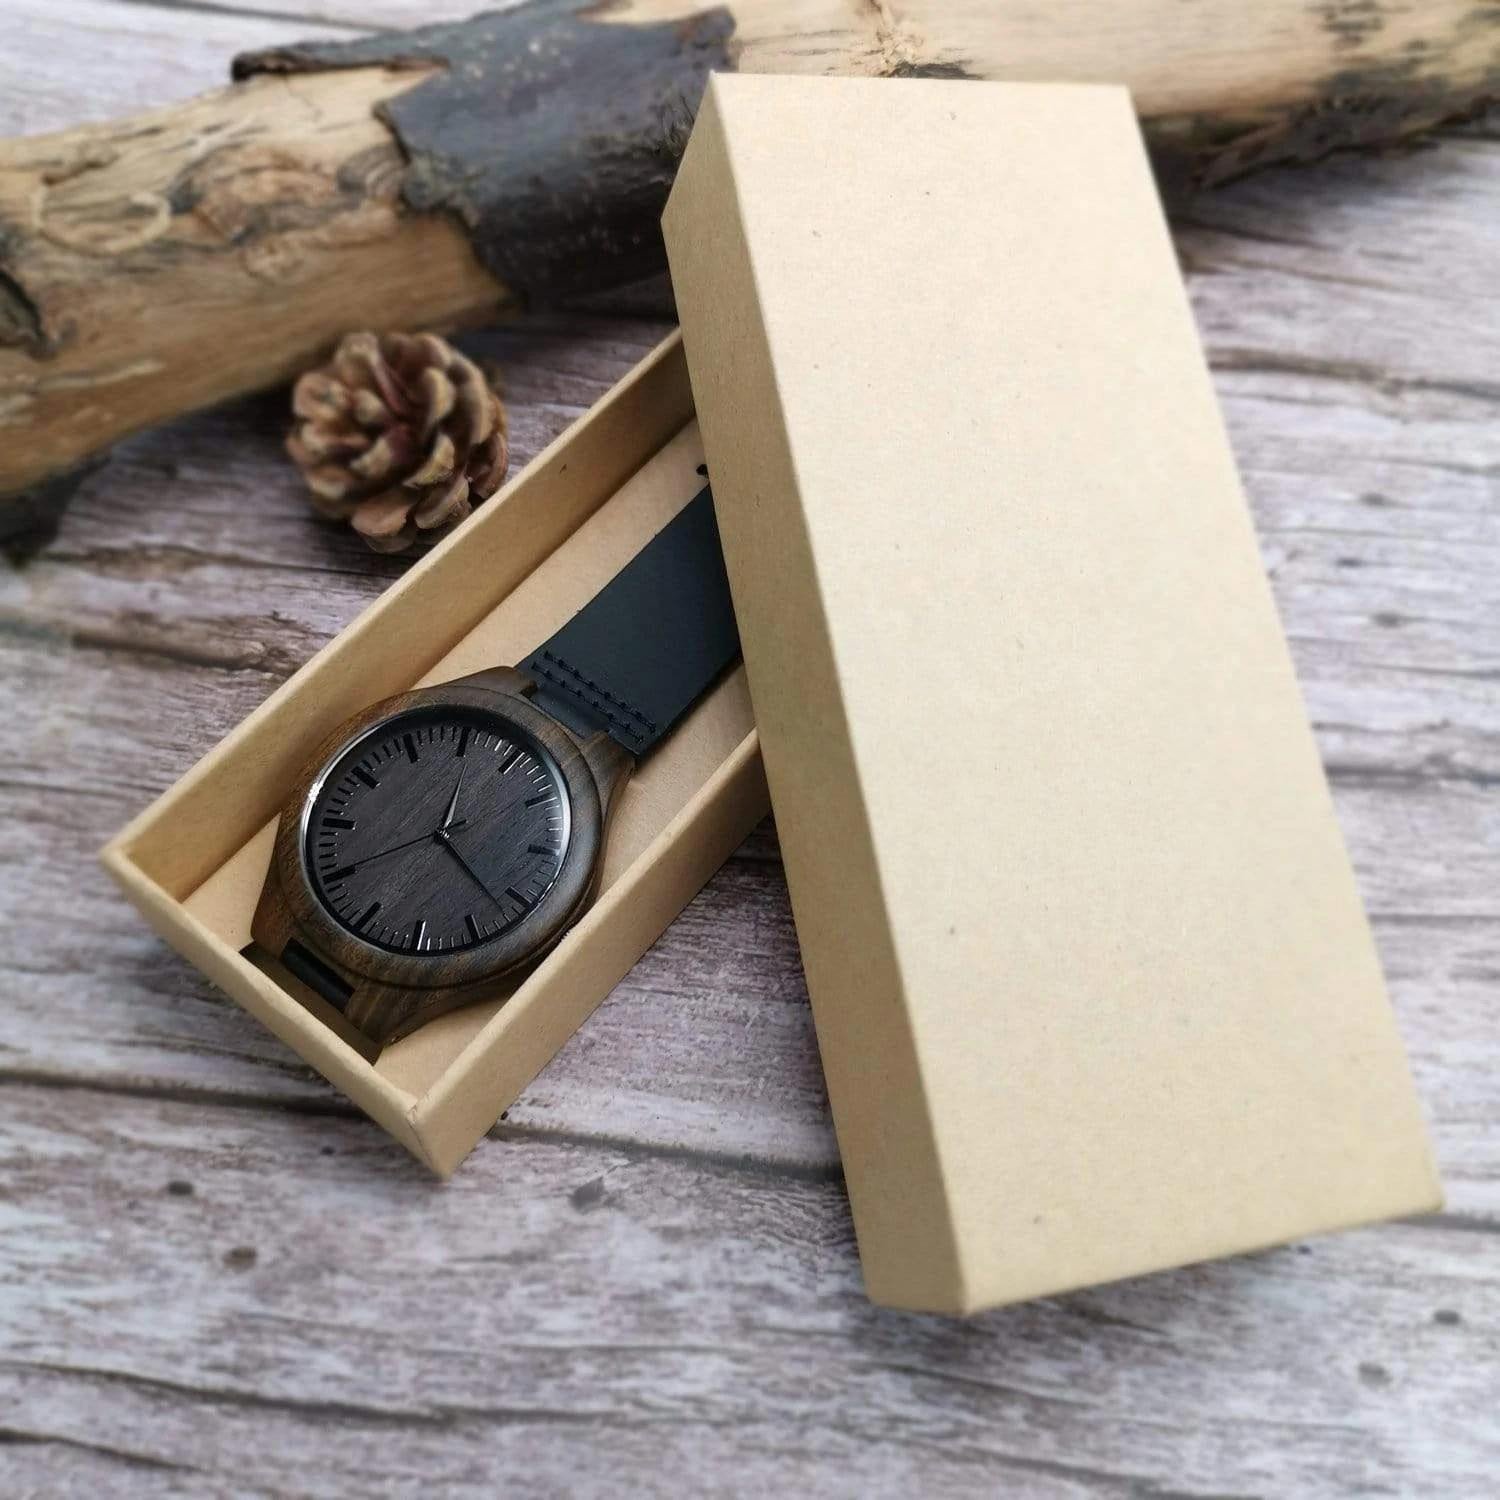 Gift For Son From Mom Always Here For You Engraved Wooden Watch